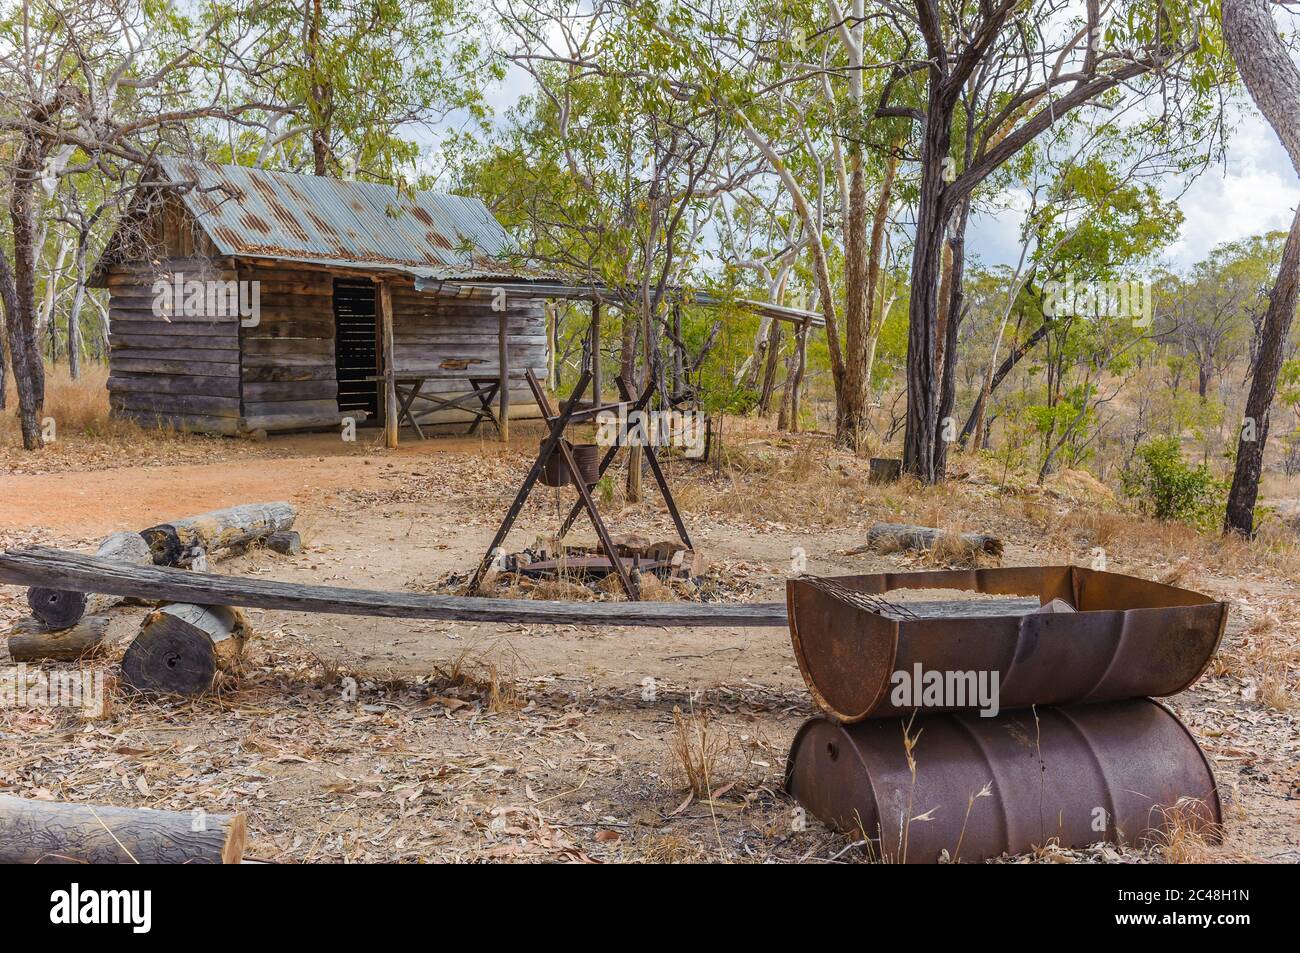 A replica old early pioneer log cabin and traditional outback, outdoor kitchen at Undara, North-west Queensland in Australia. Stock Photo